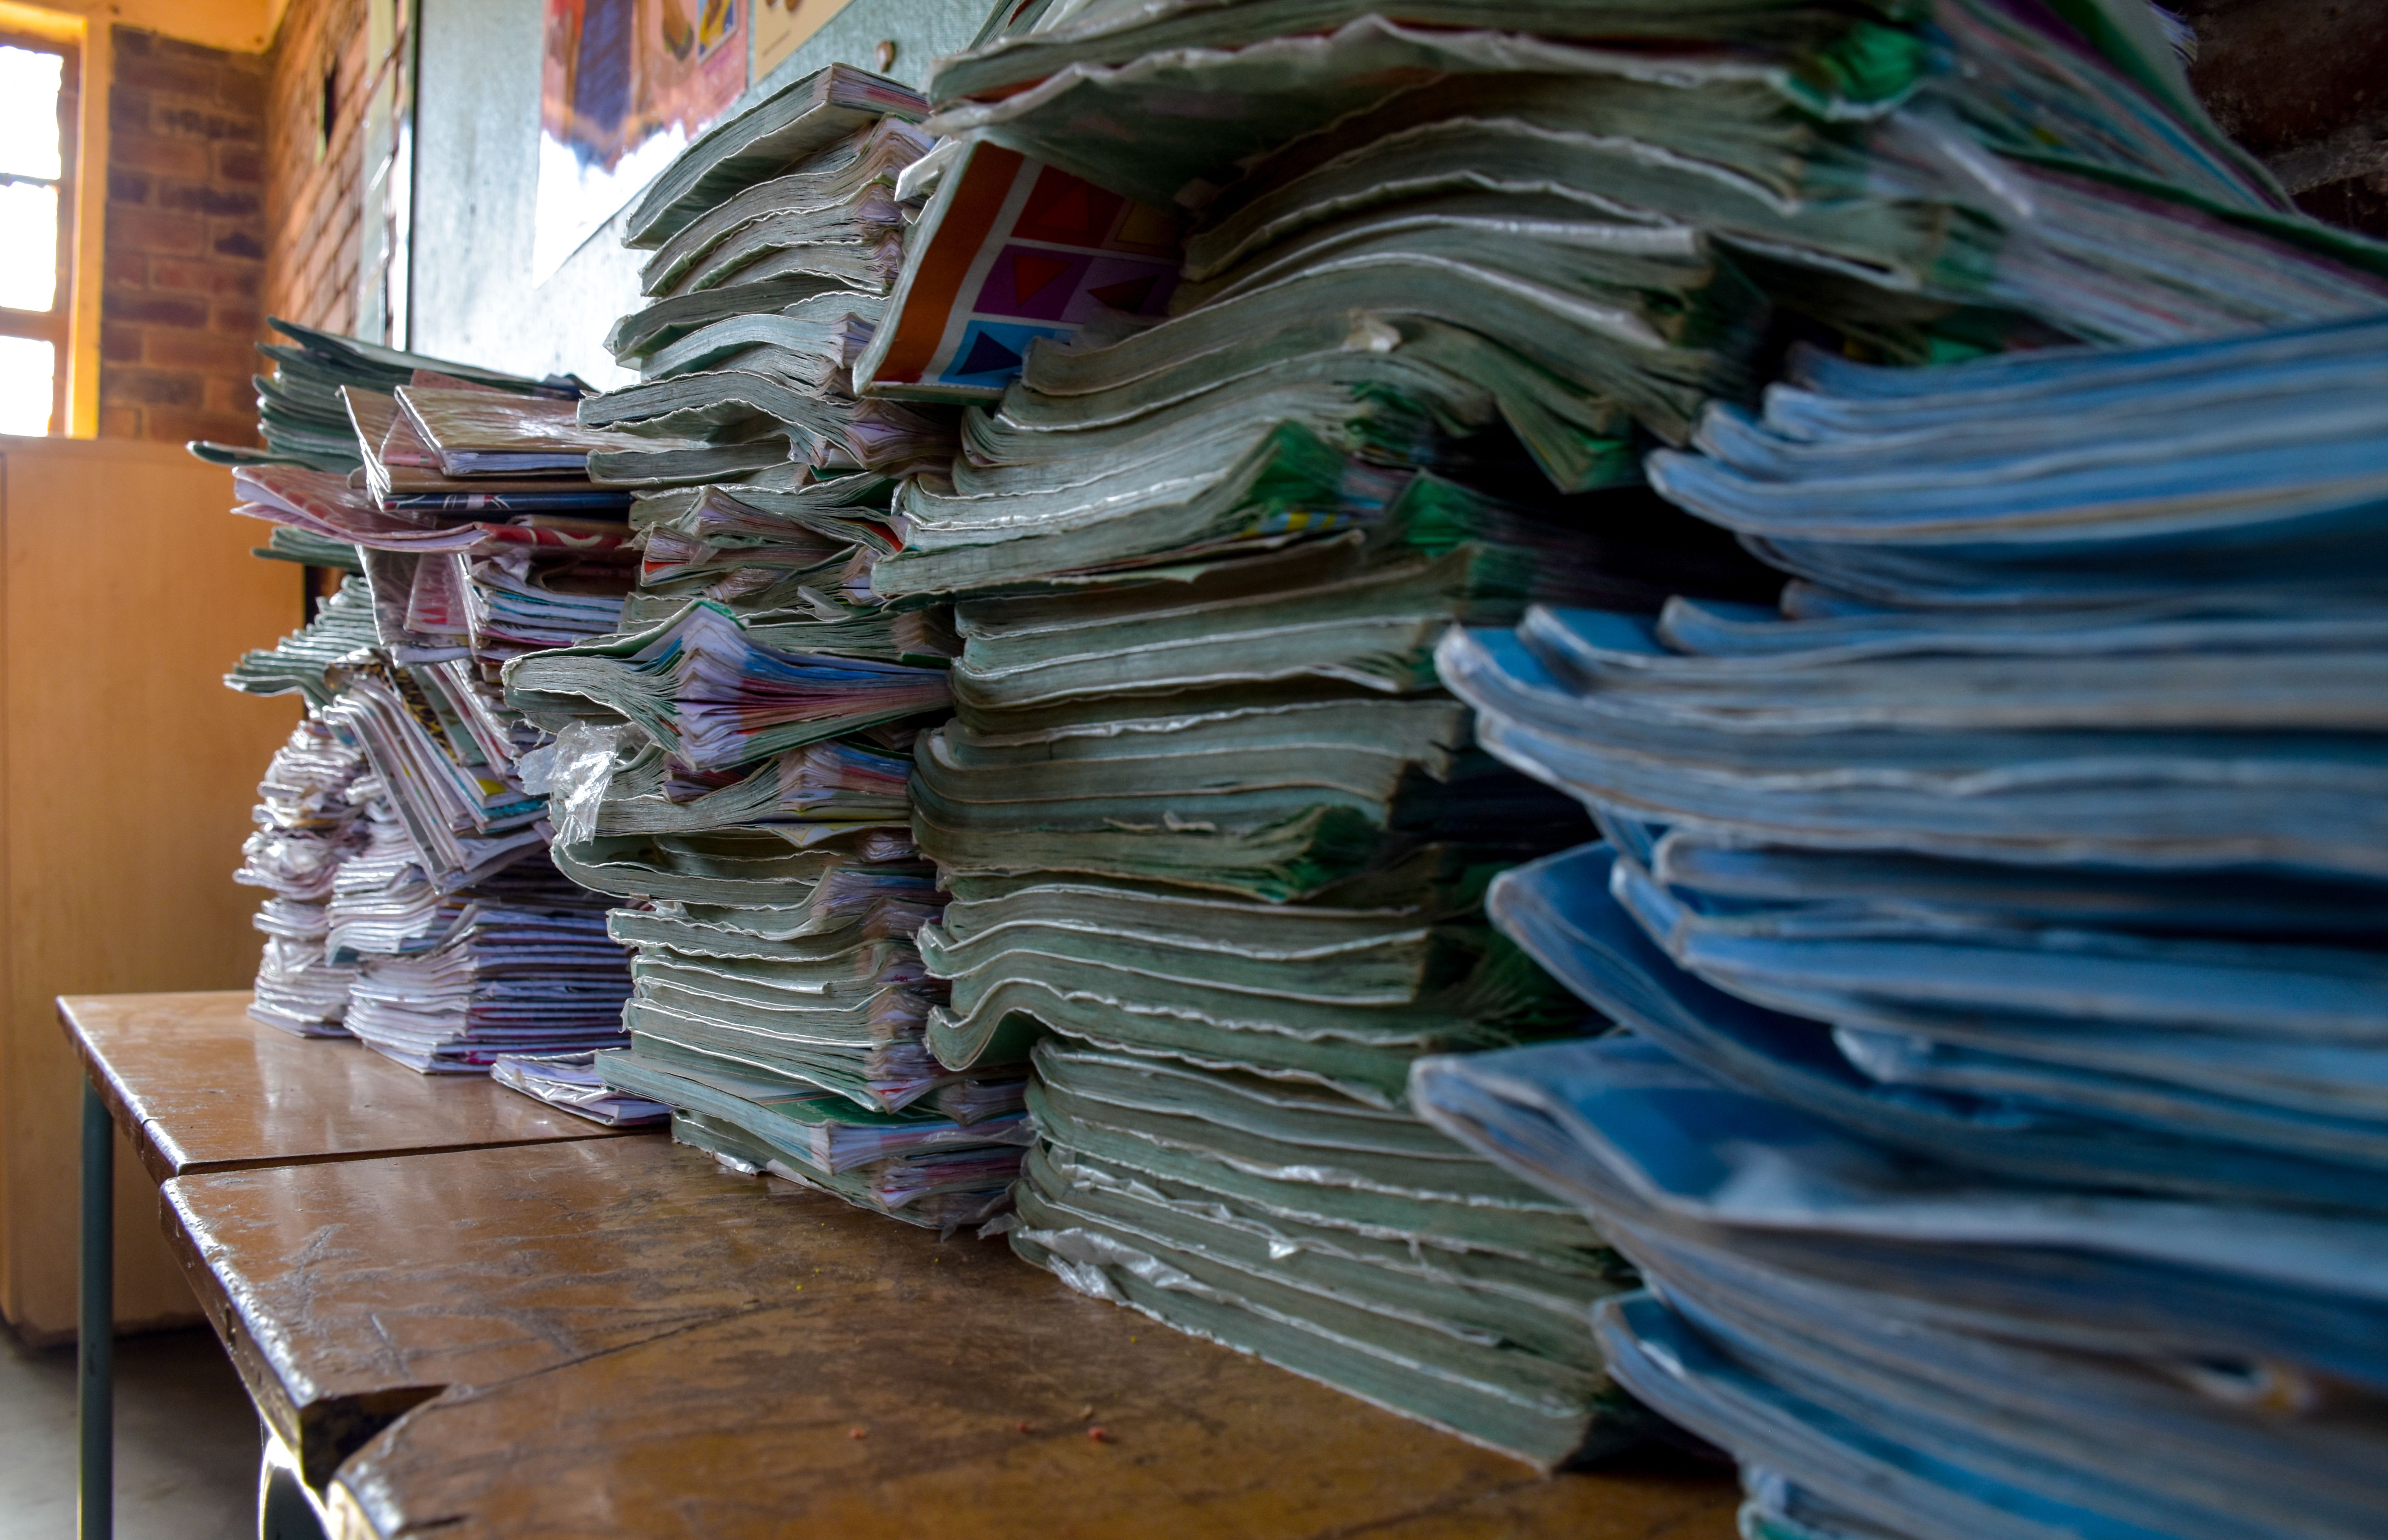 A pile of old textbooks at Utjane Primary School in Limpopo. Many rural schools lack libraries as well as other components of a "basic education." Image by Adam Yates. South Africa, 2018.